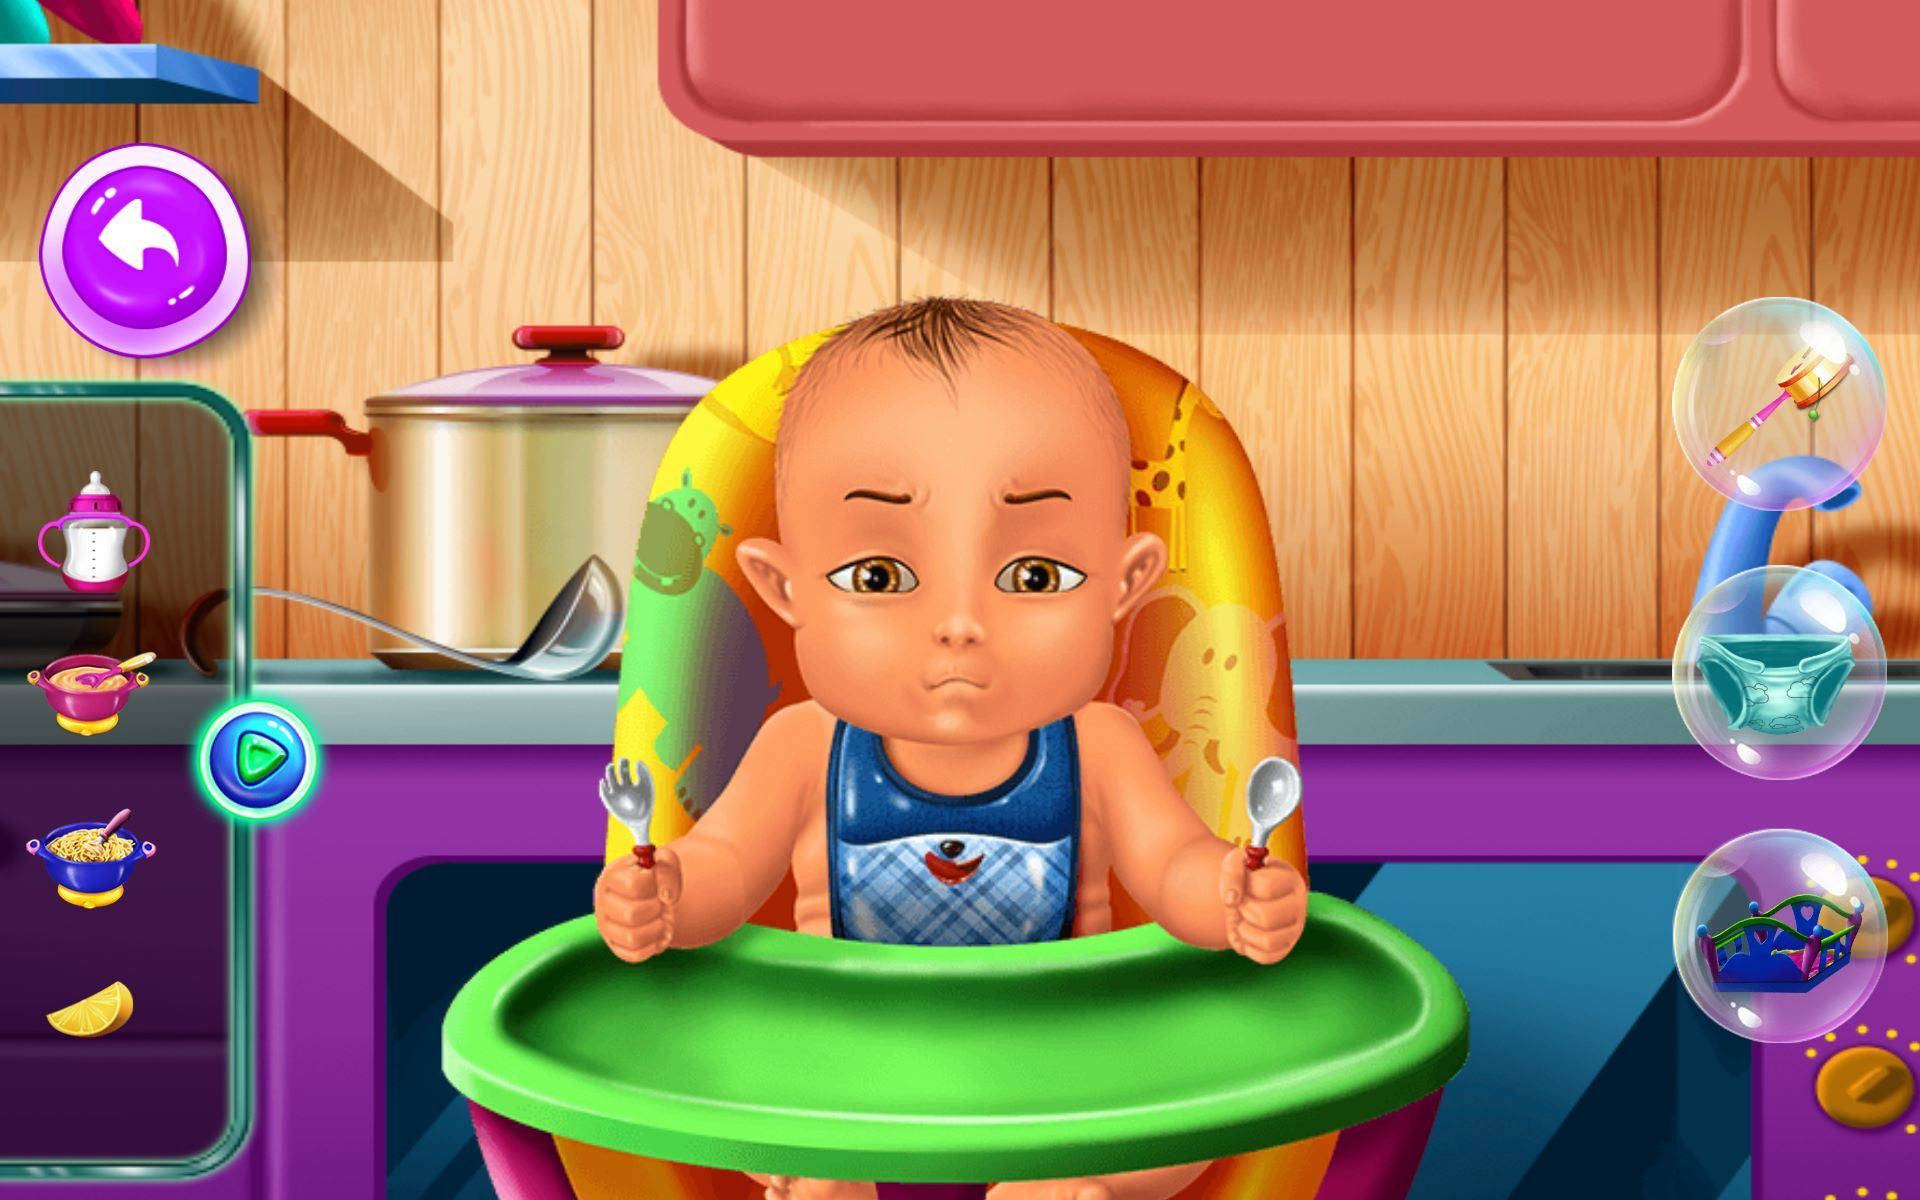 Newborn Baby Care - Girls Game : a wonderful baby care simulation game - your kids can play at being mommy! FREE